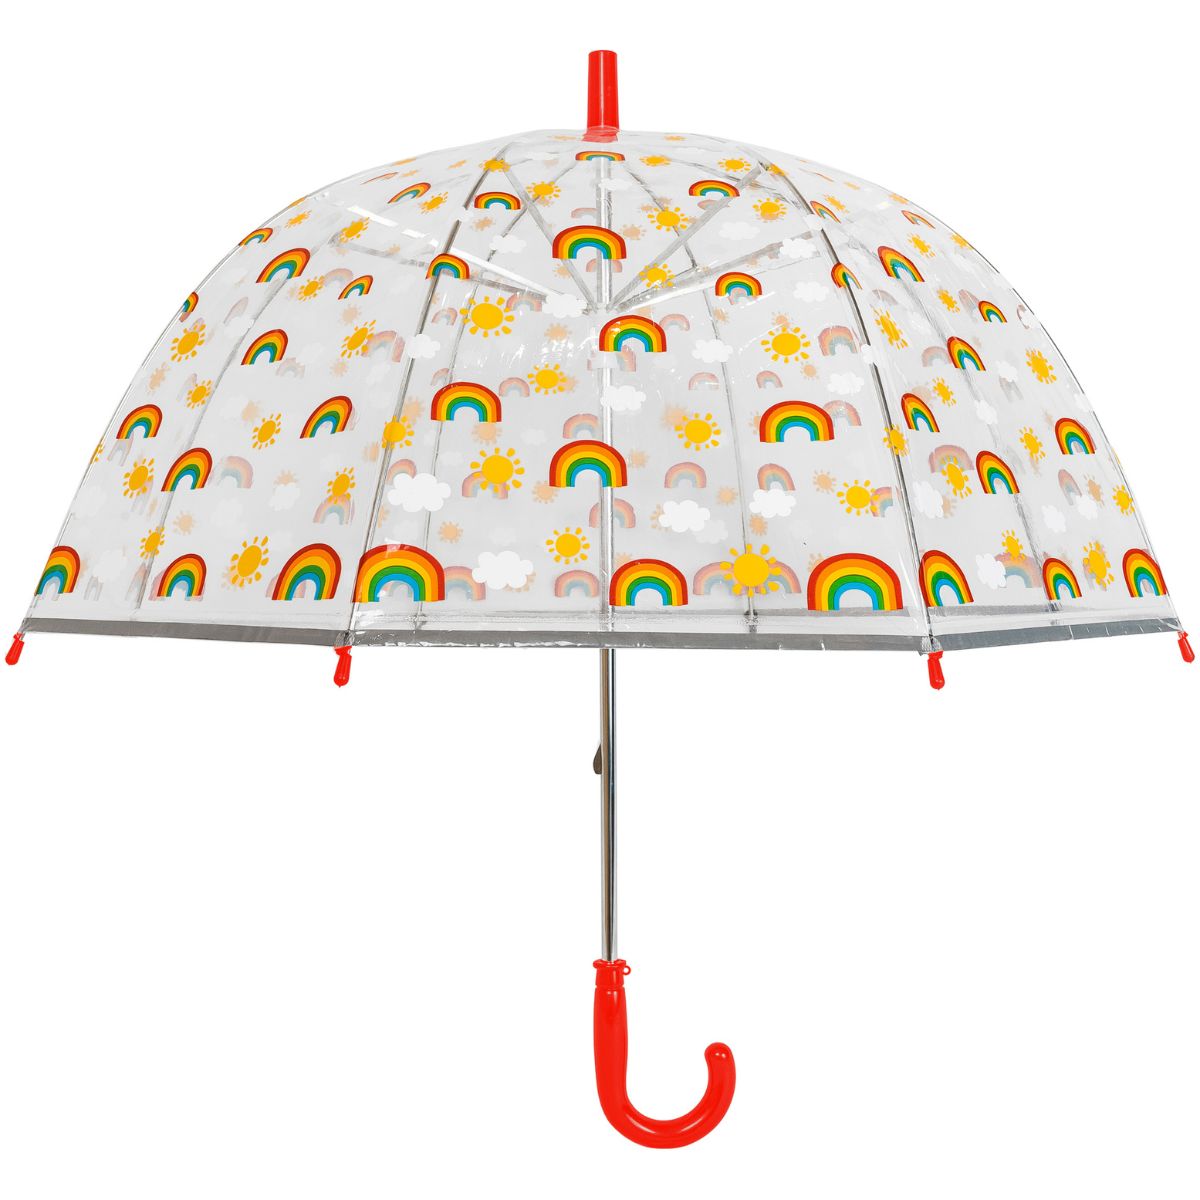 children's rainbow umbrella with red handle and tip viewed upright and open